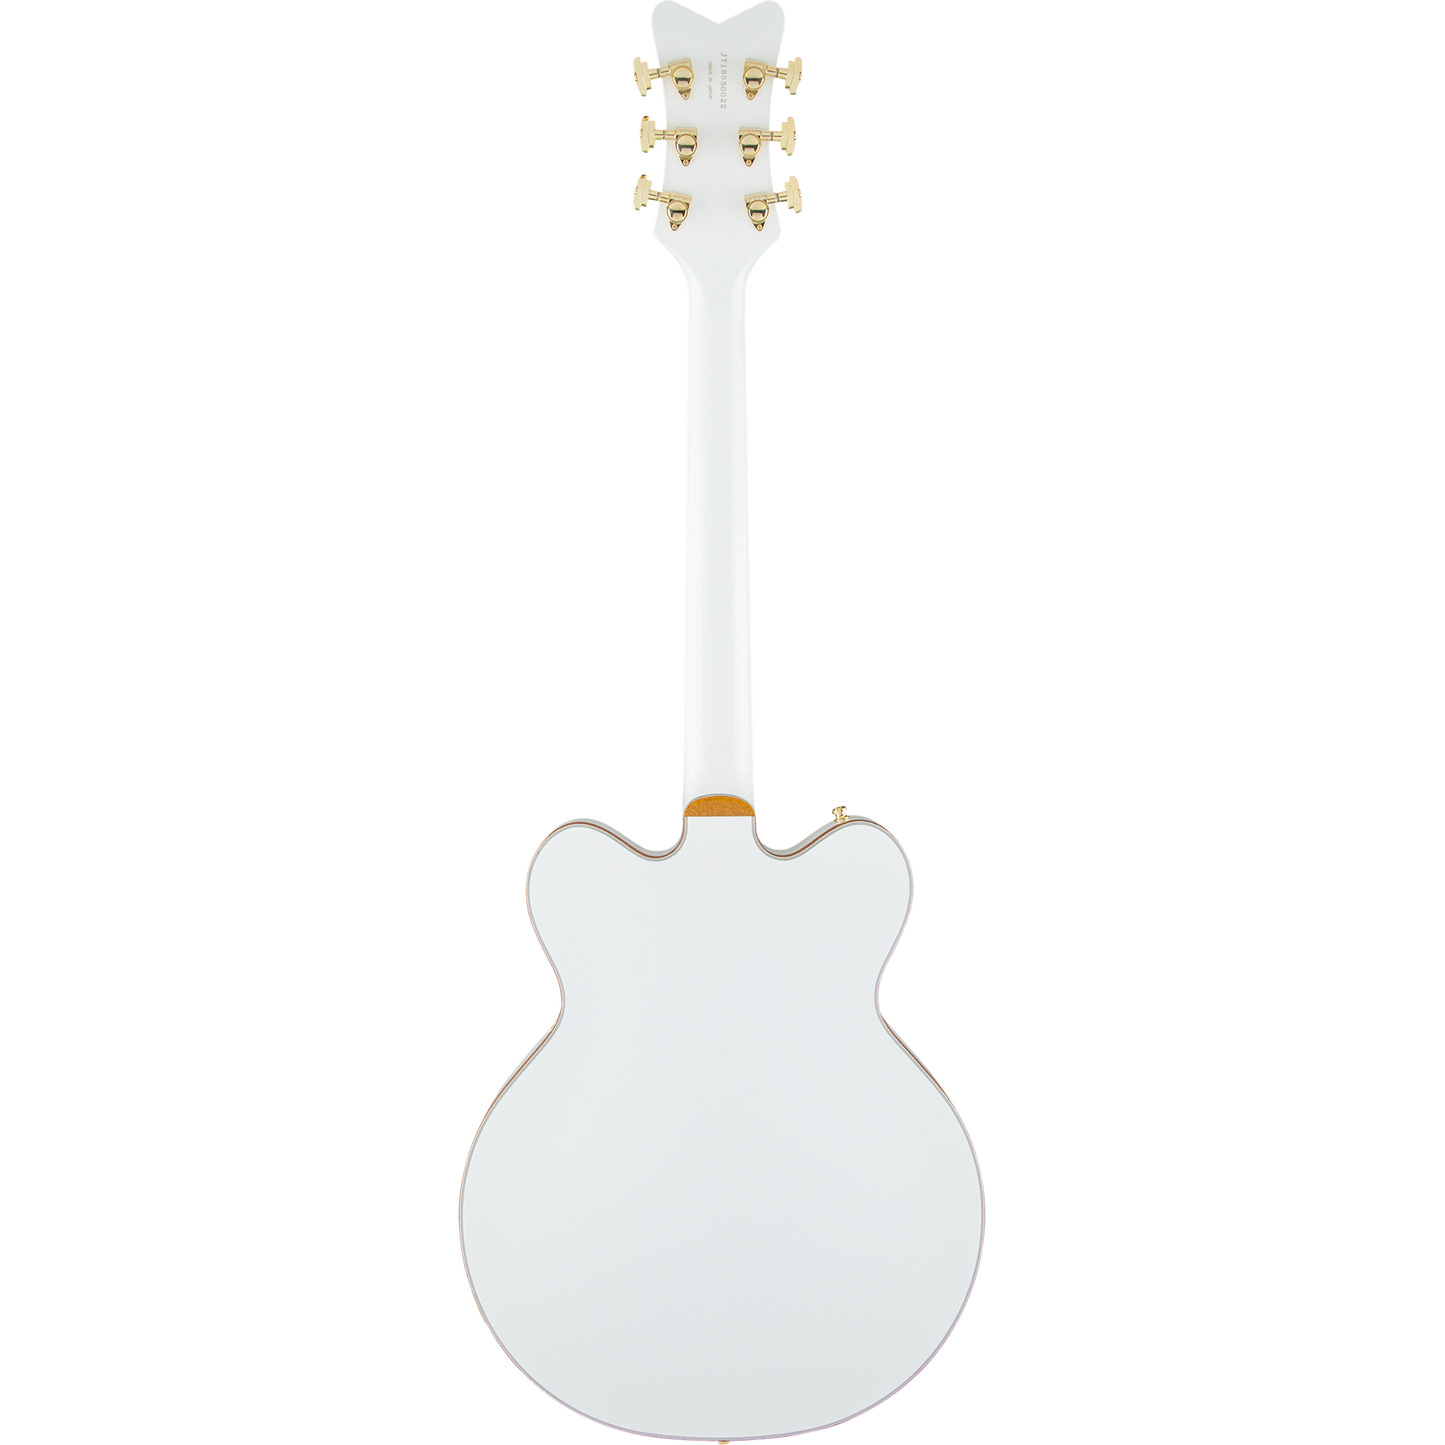 Gretsch G6636T Players Edition Falcon™ Center Block Double-Cut Electric Guitar, White